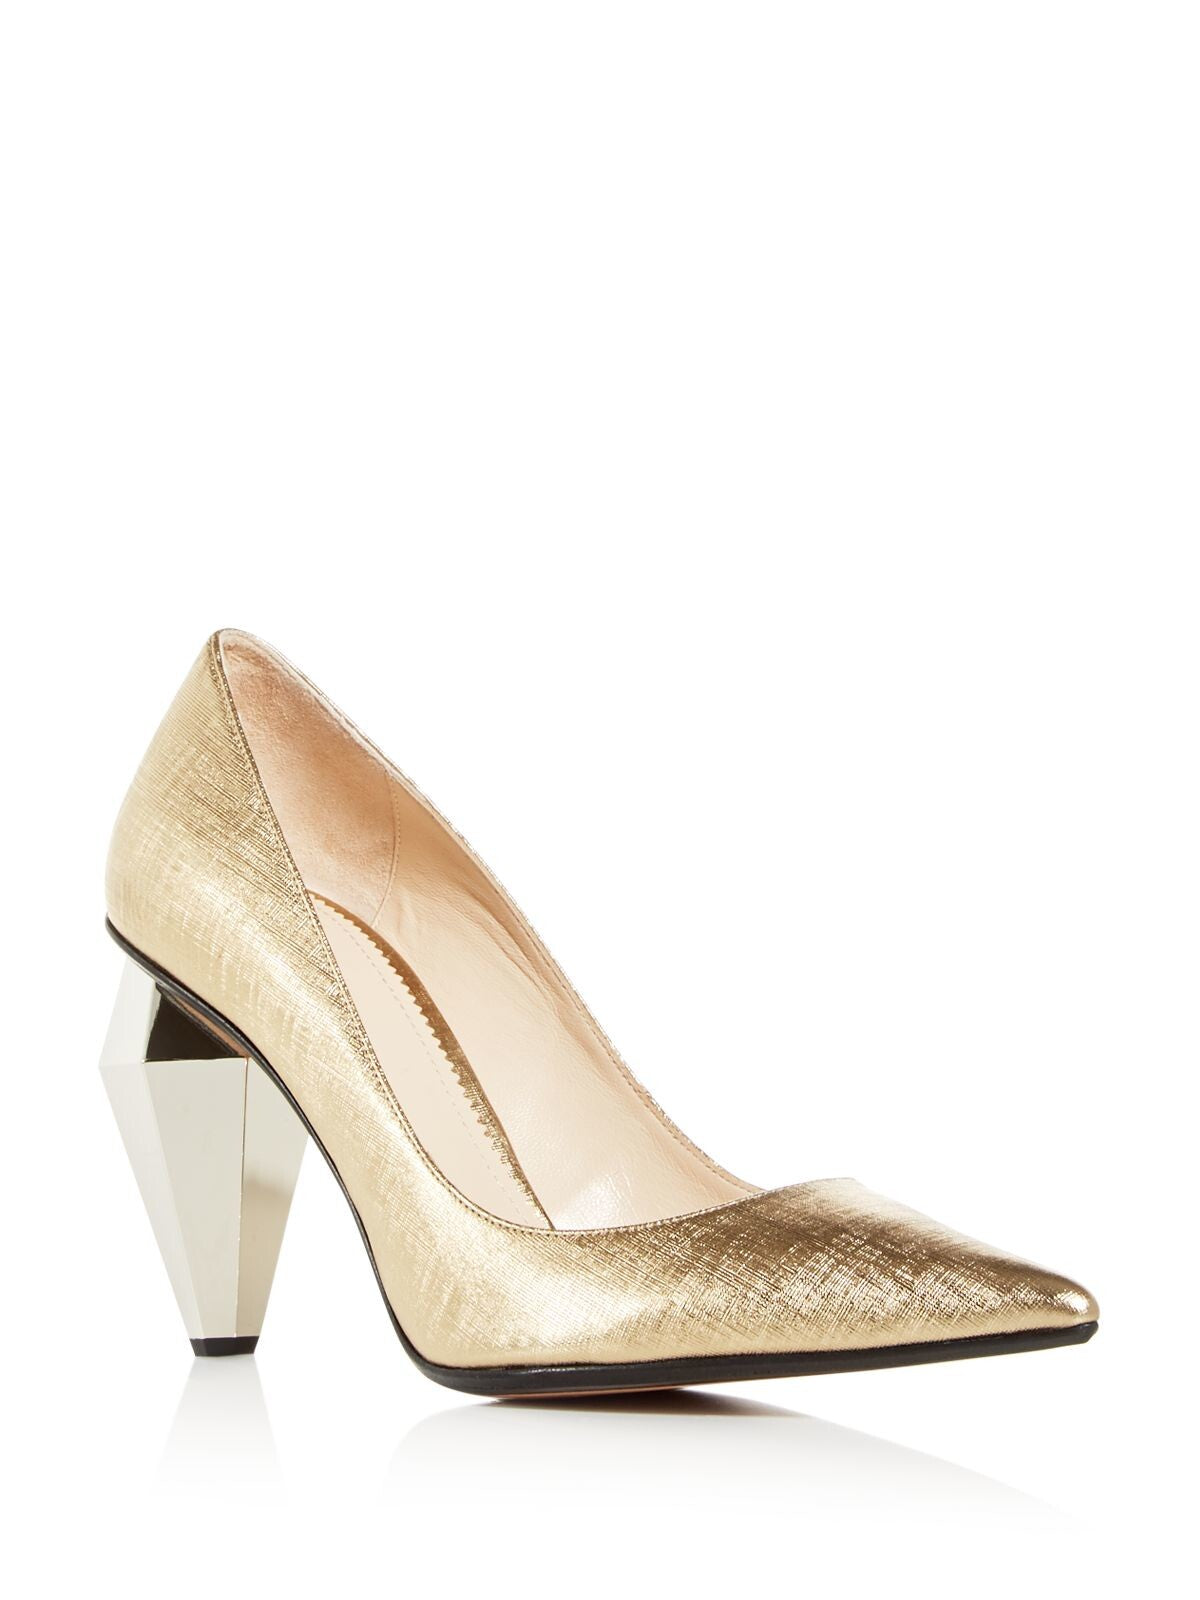 MARC JACOBS Womens Gold Comfort Metallic The Pump Pointed Toe Sculpted Heel Slip On Leather Dress Pumps Shoes 38.5